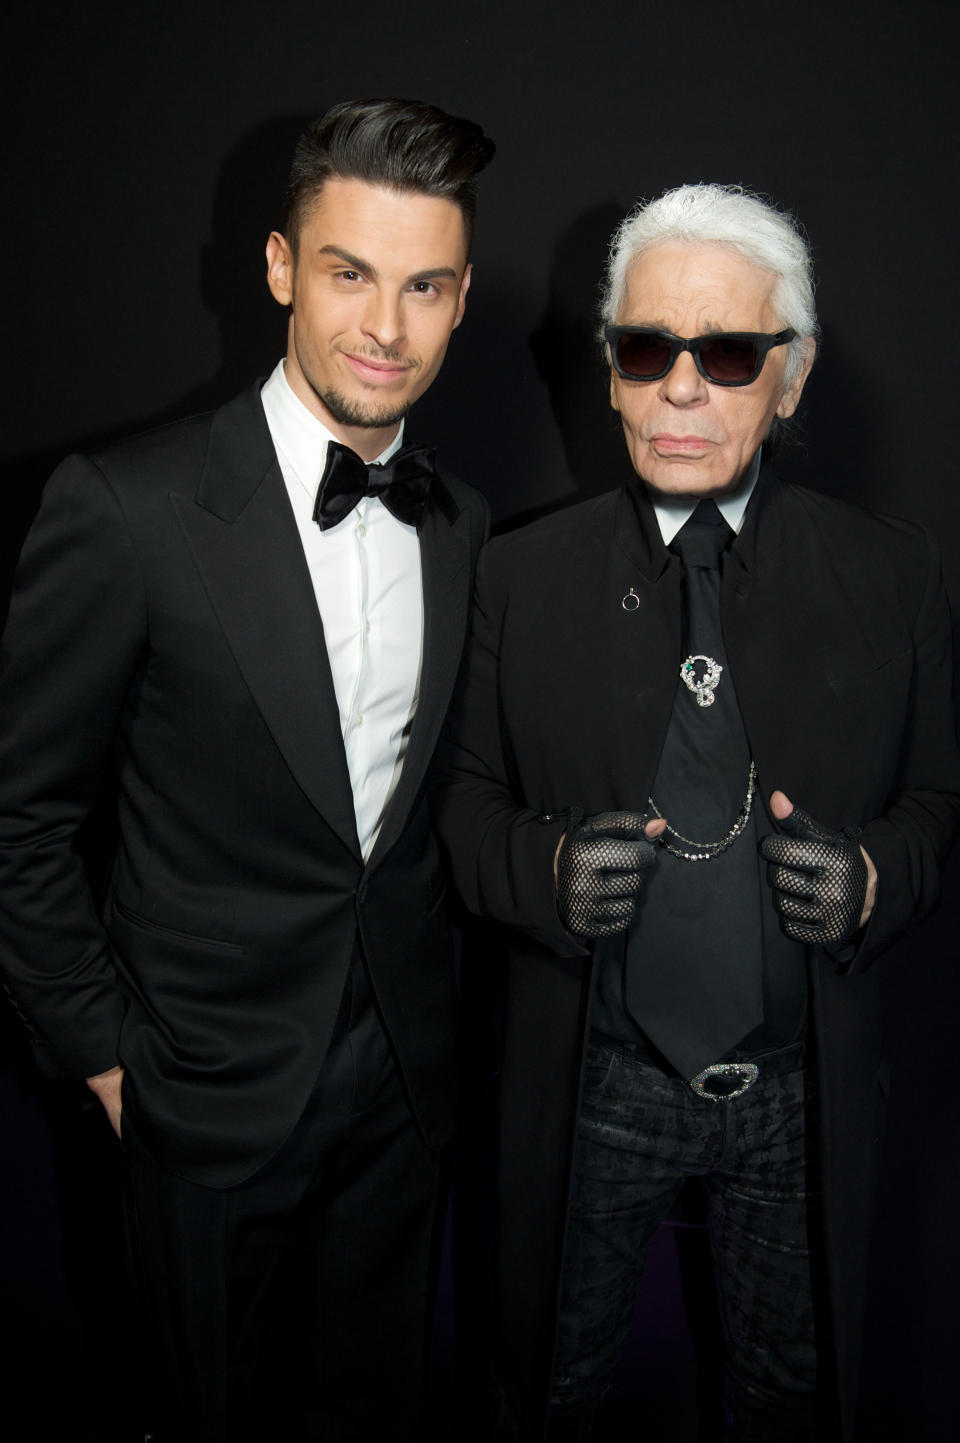 Karl Lagerfeld and Baptiste Giabiconi attend the Karl Lagerfeld New Perfume launch party at Palais Brongniart, in Paris. 